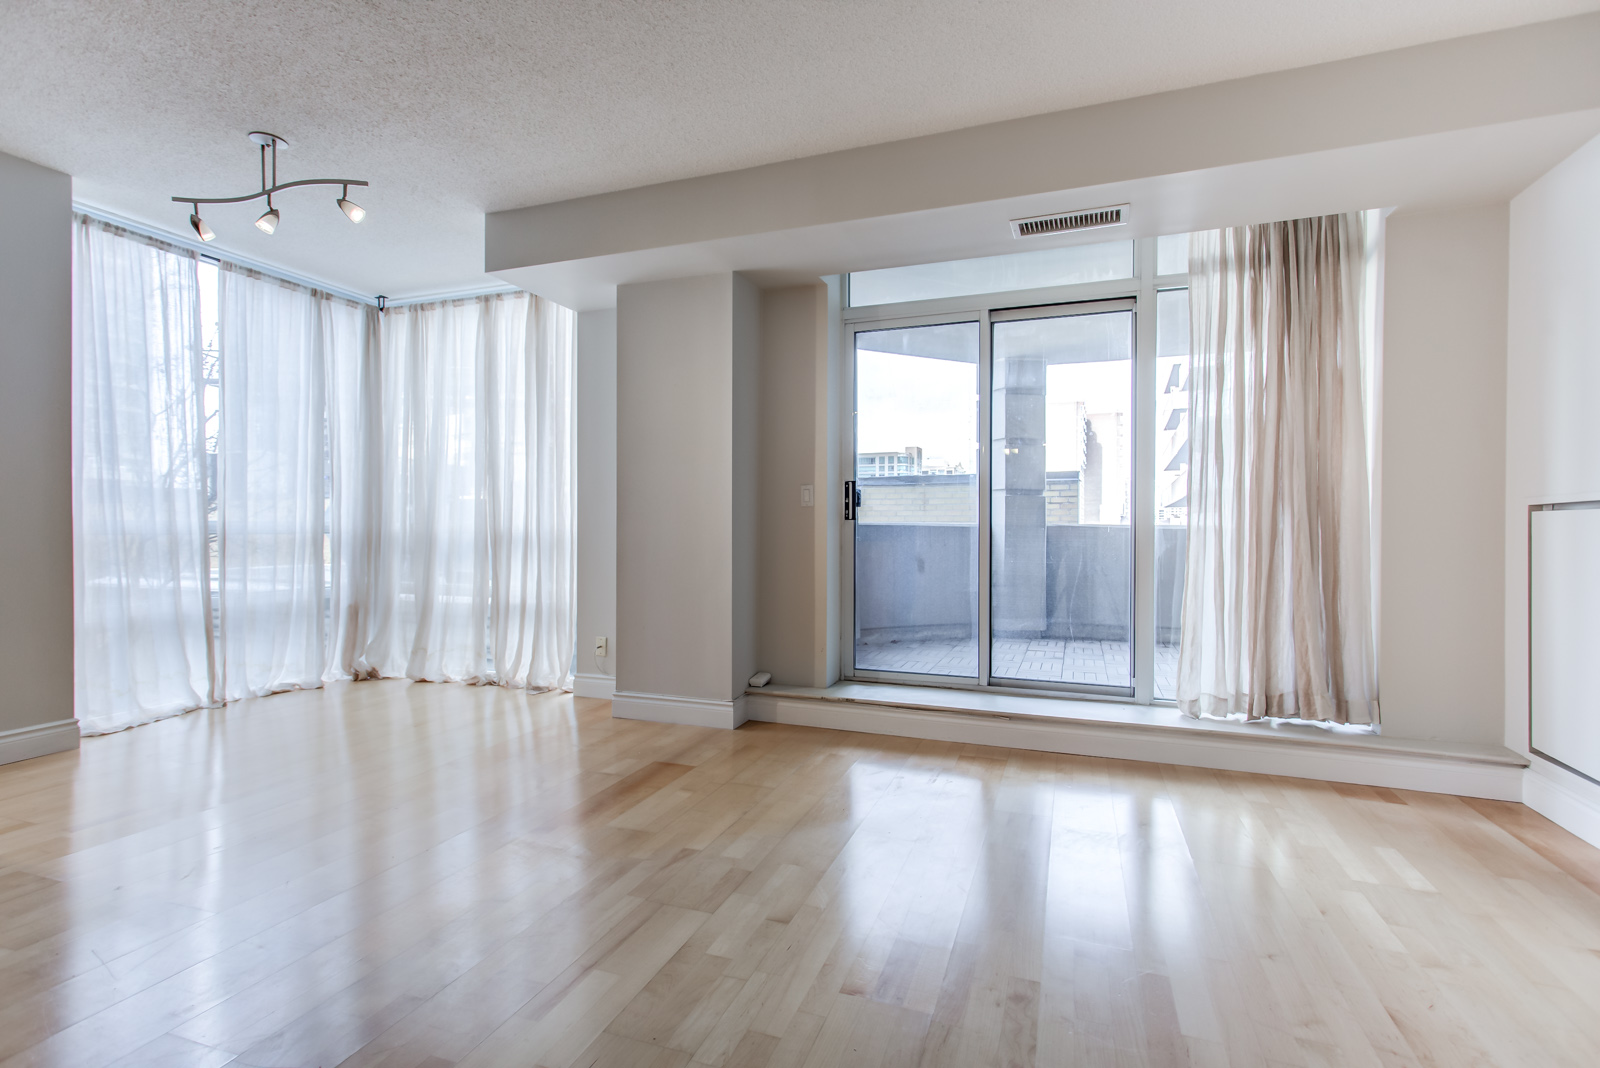 Brightly lit empty living room with gray walls and hardwood floors of 20 Collier St Unit 408.